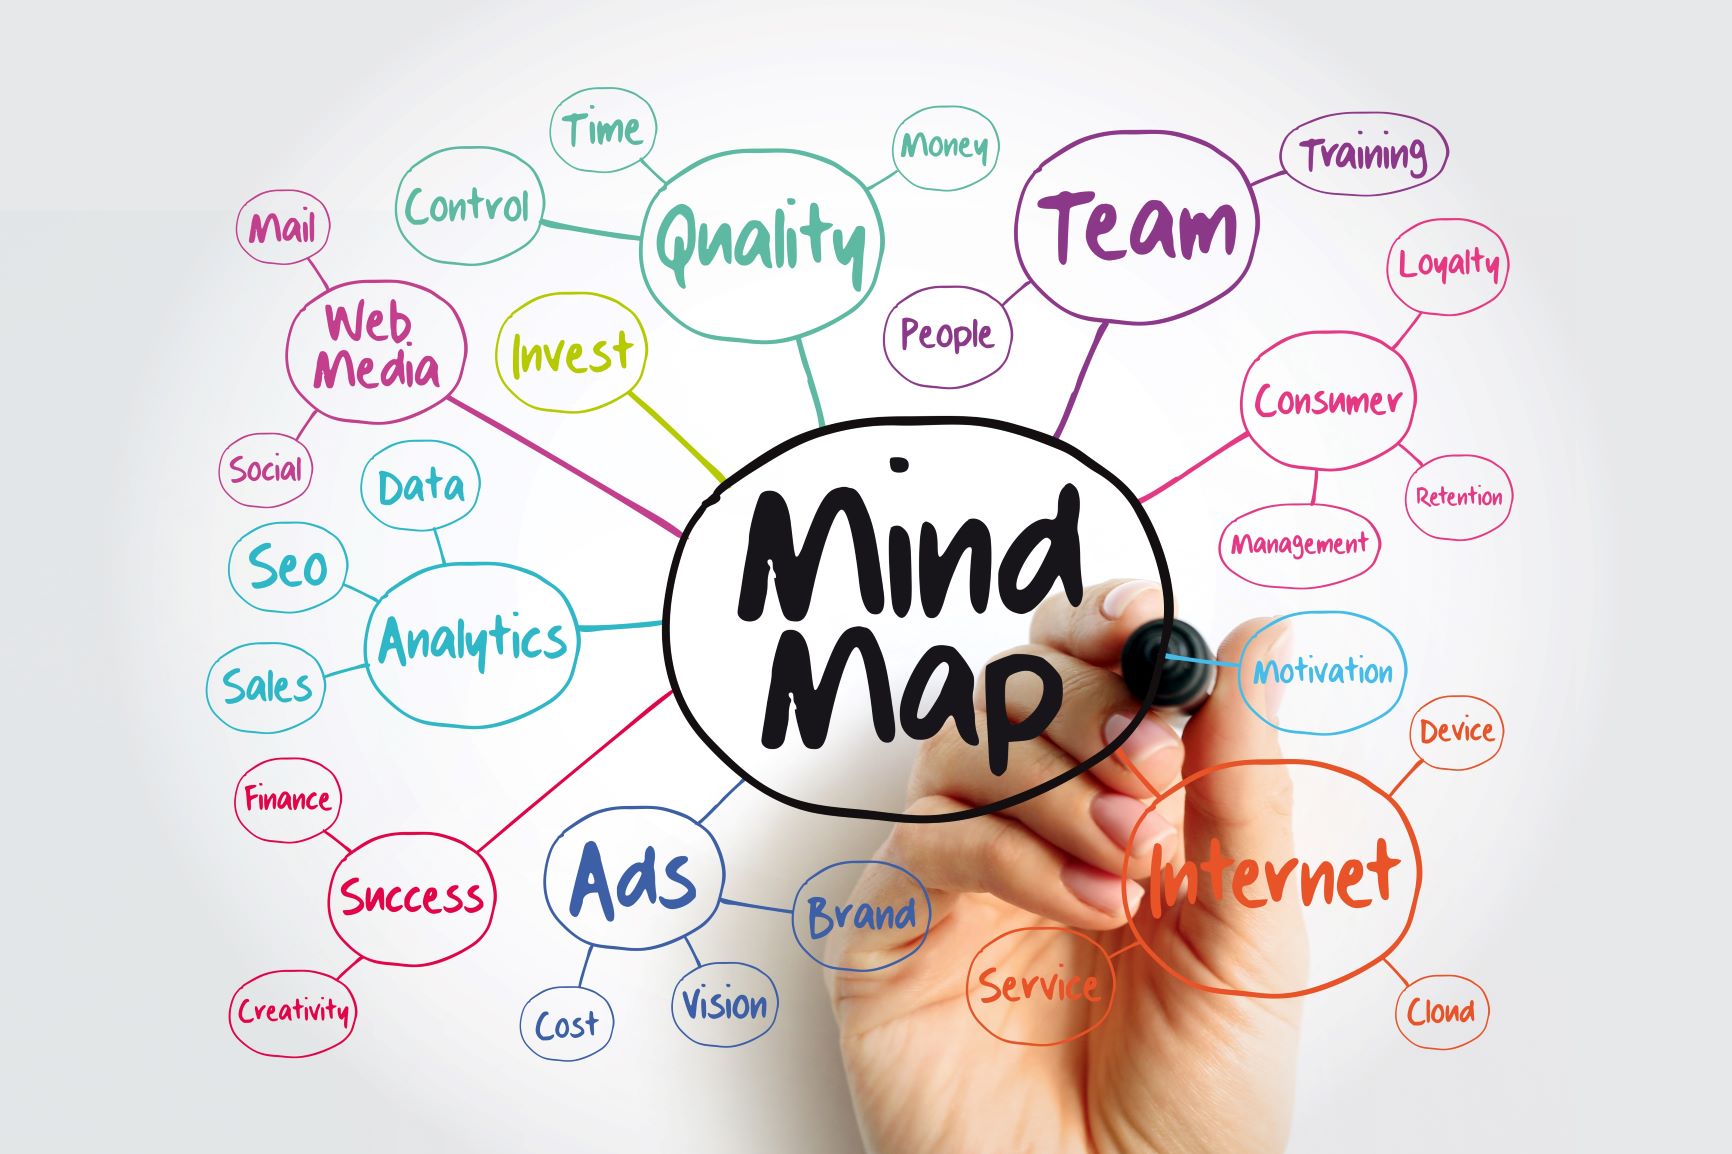 Tips on how to build the best creative mind map